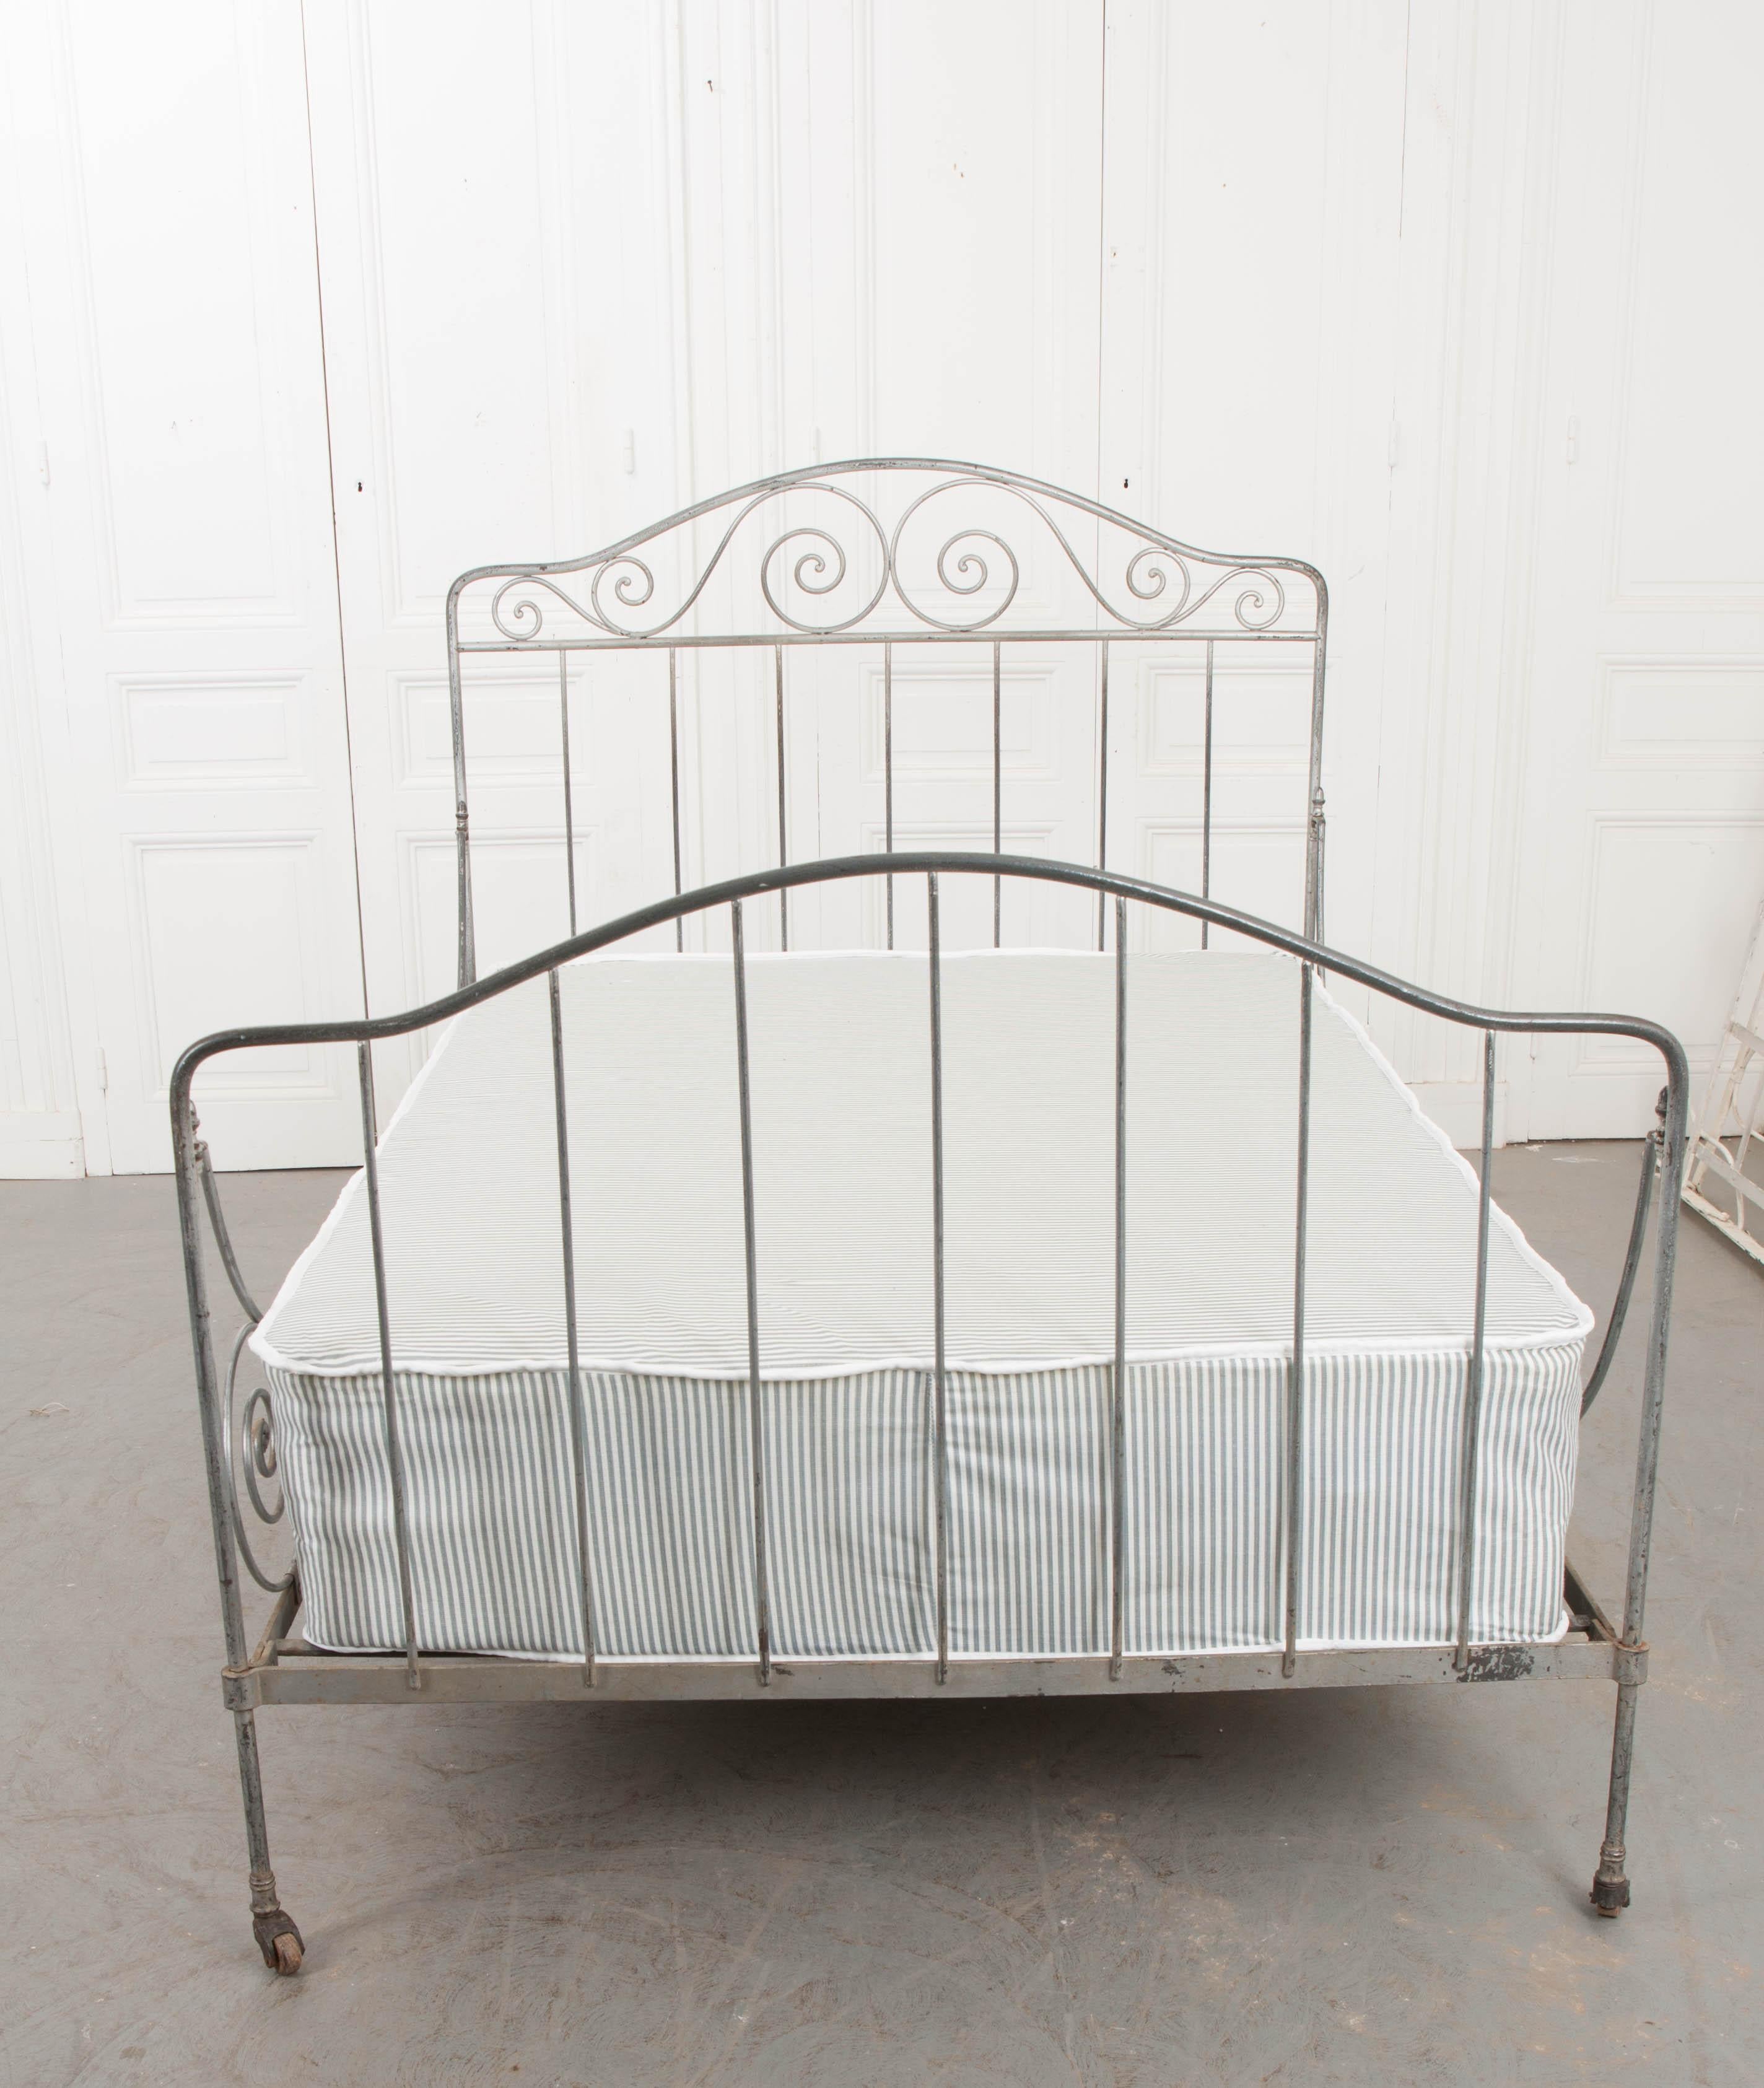 This lovely full-size folding silver-painted and gold-highlighted iron Campaign daybed, c. 1870, was found in France. Originally created for military campaigns, it was made to fold for ease of travel. The shaped headboard features a scroll-work